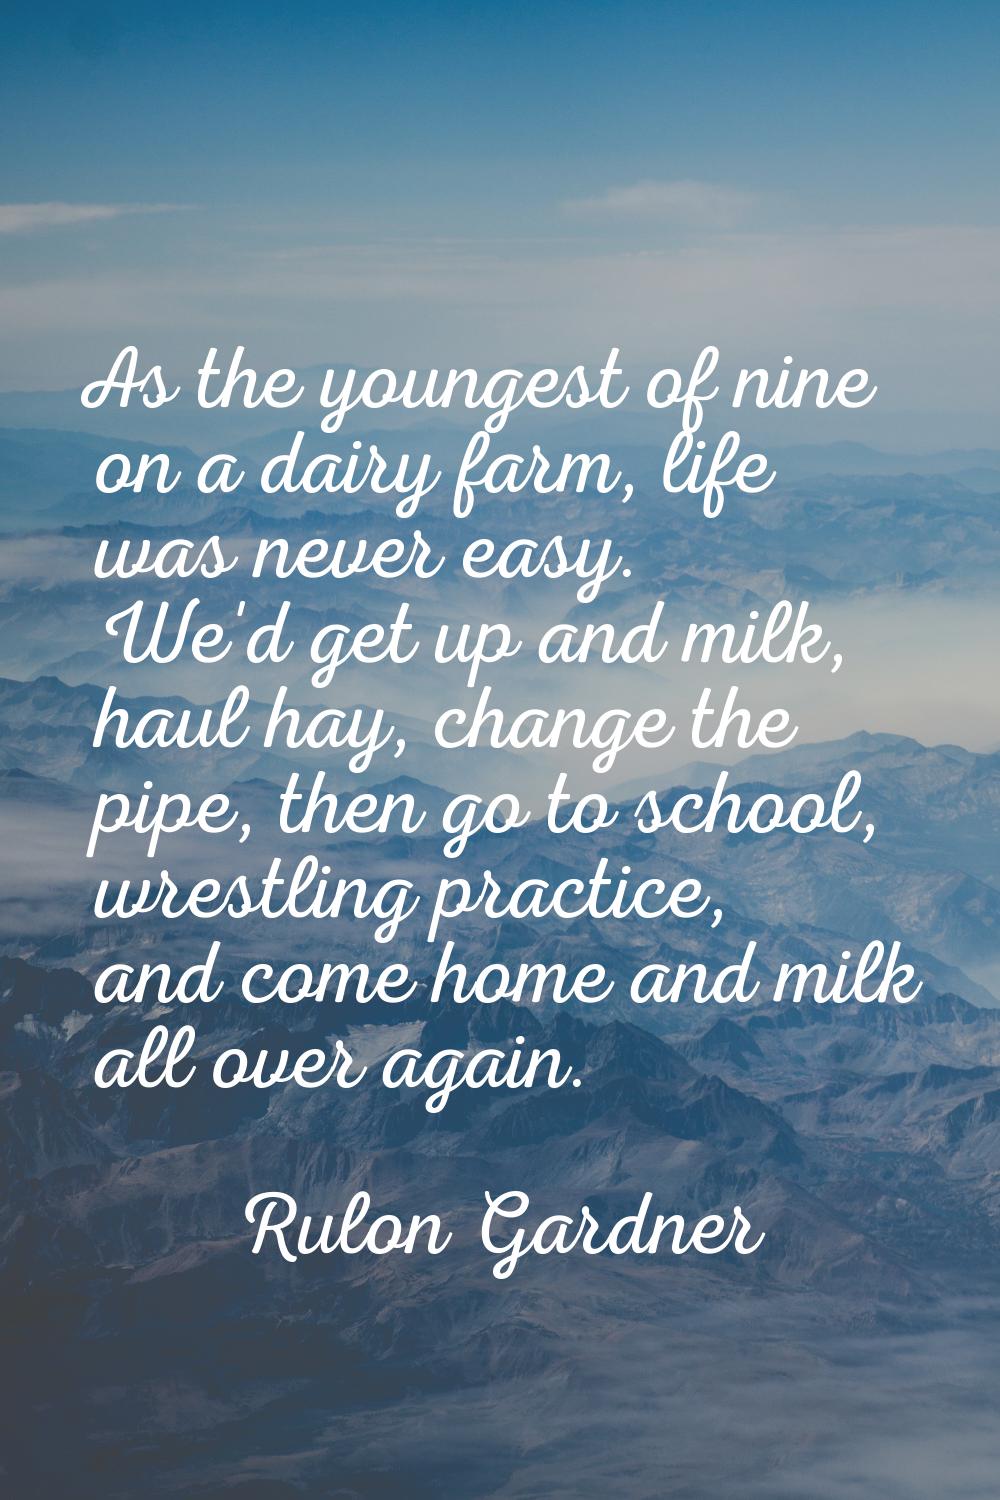 As the youngest of nine on a dairy farm, life was never easy. We'd get up and milk, haul hay, chang